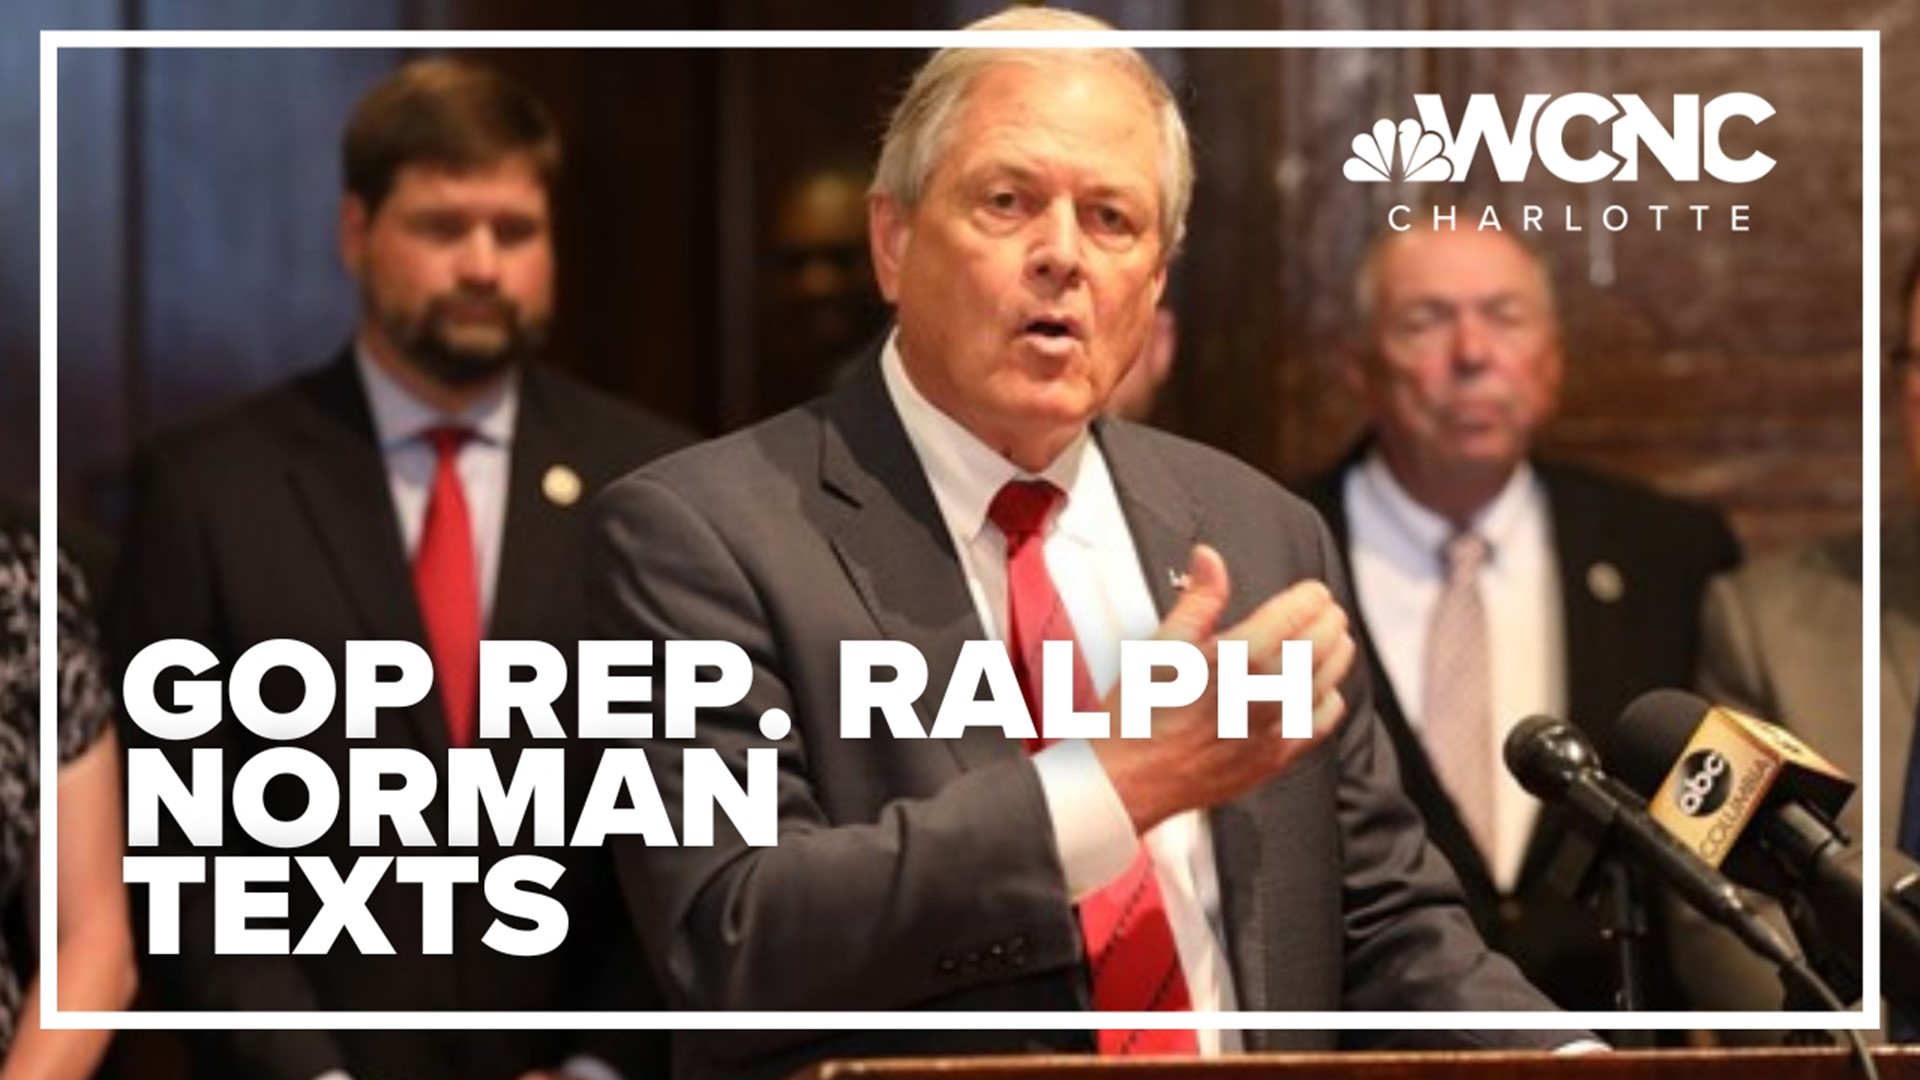 U.S. Rep. Ralph Norman said a text message calling for a military takeover to keep Donald Trump in power came from a "source of frustration" over election integrity.